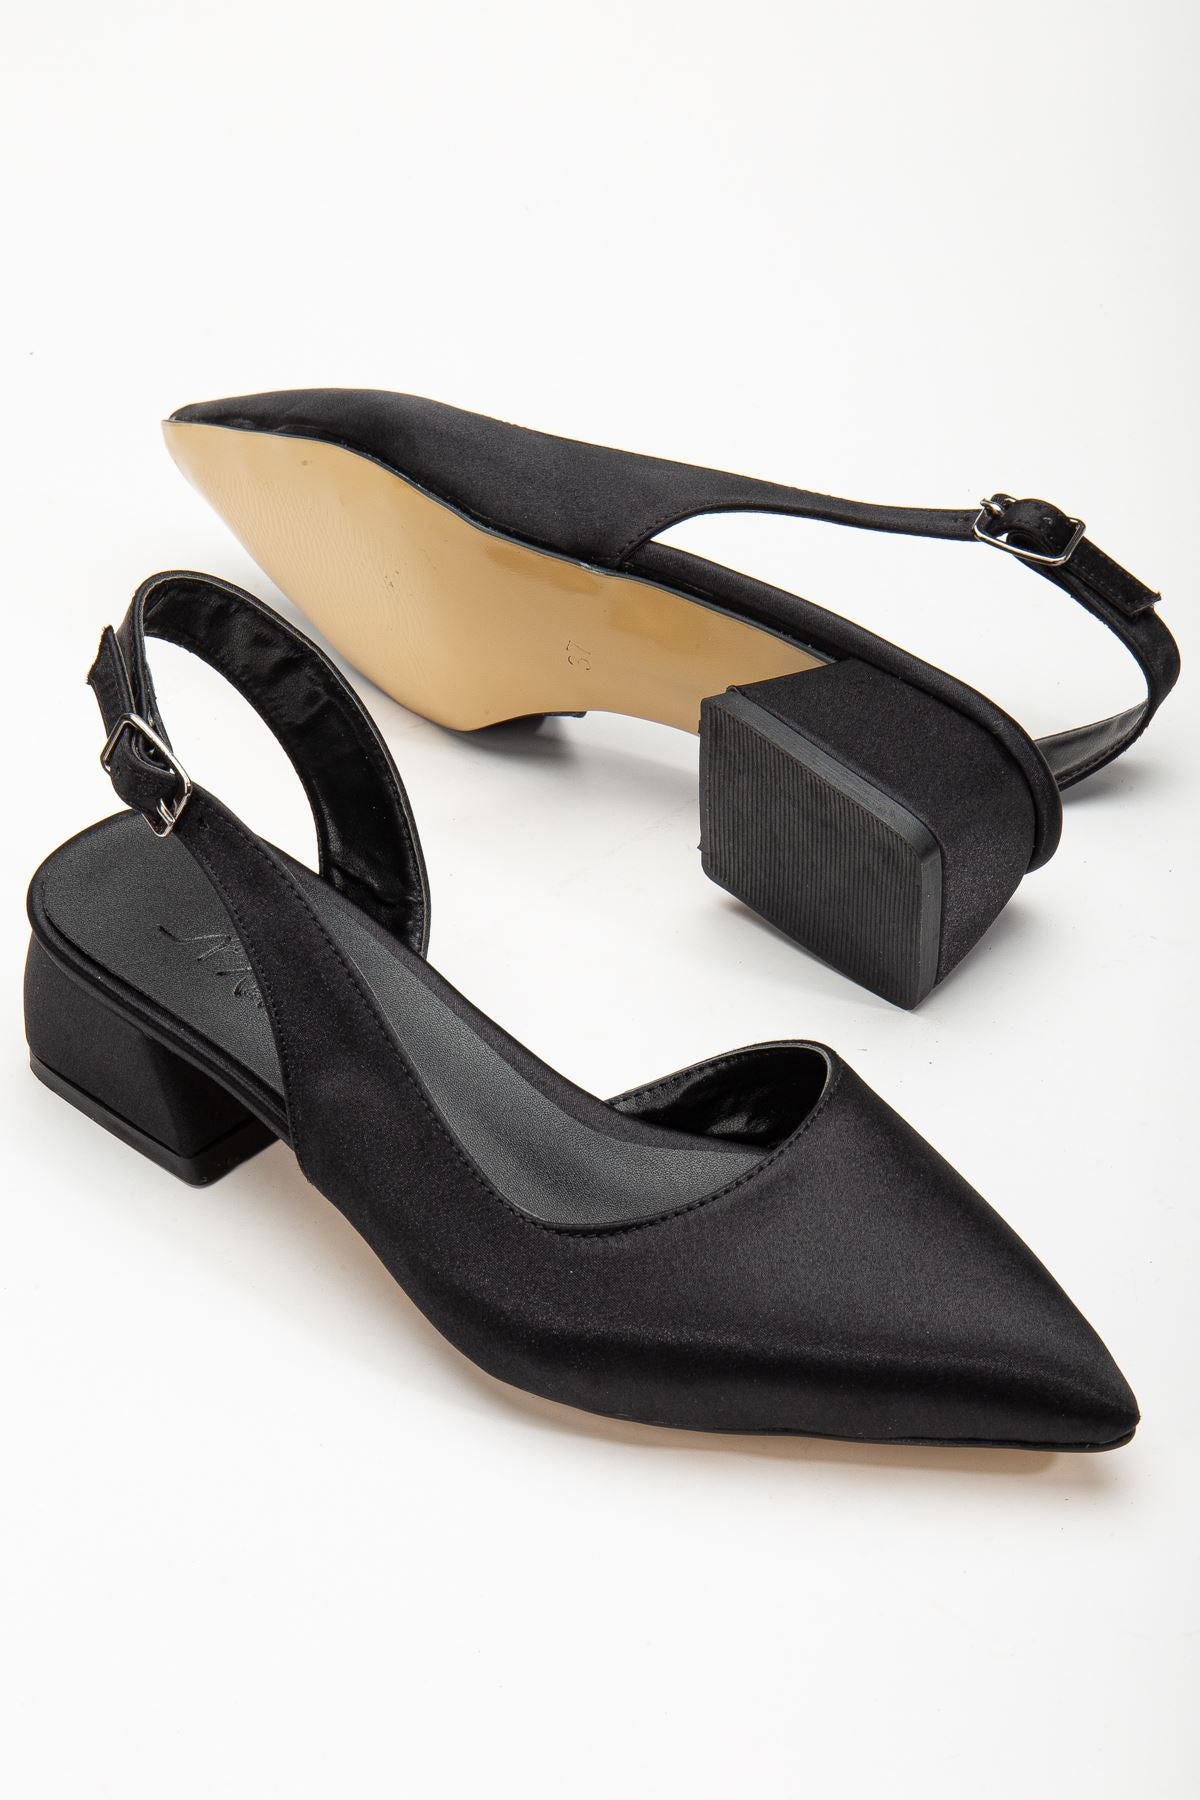 Ossie Black Satin Women's Heeled Shoes - STREETMODE ™